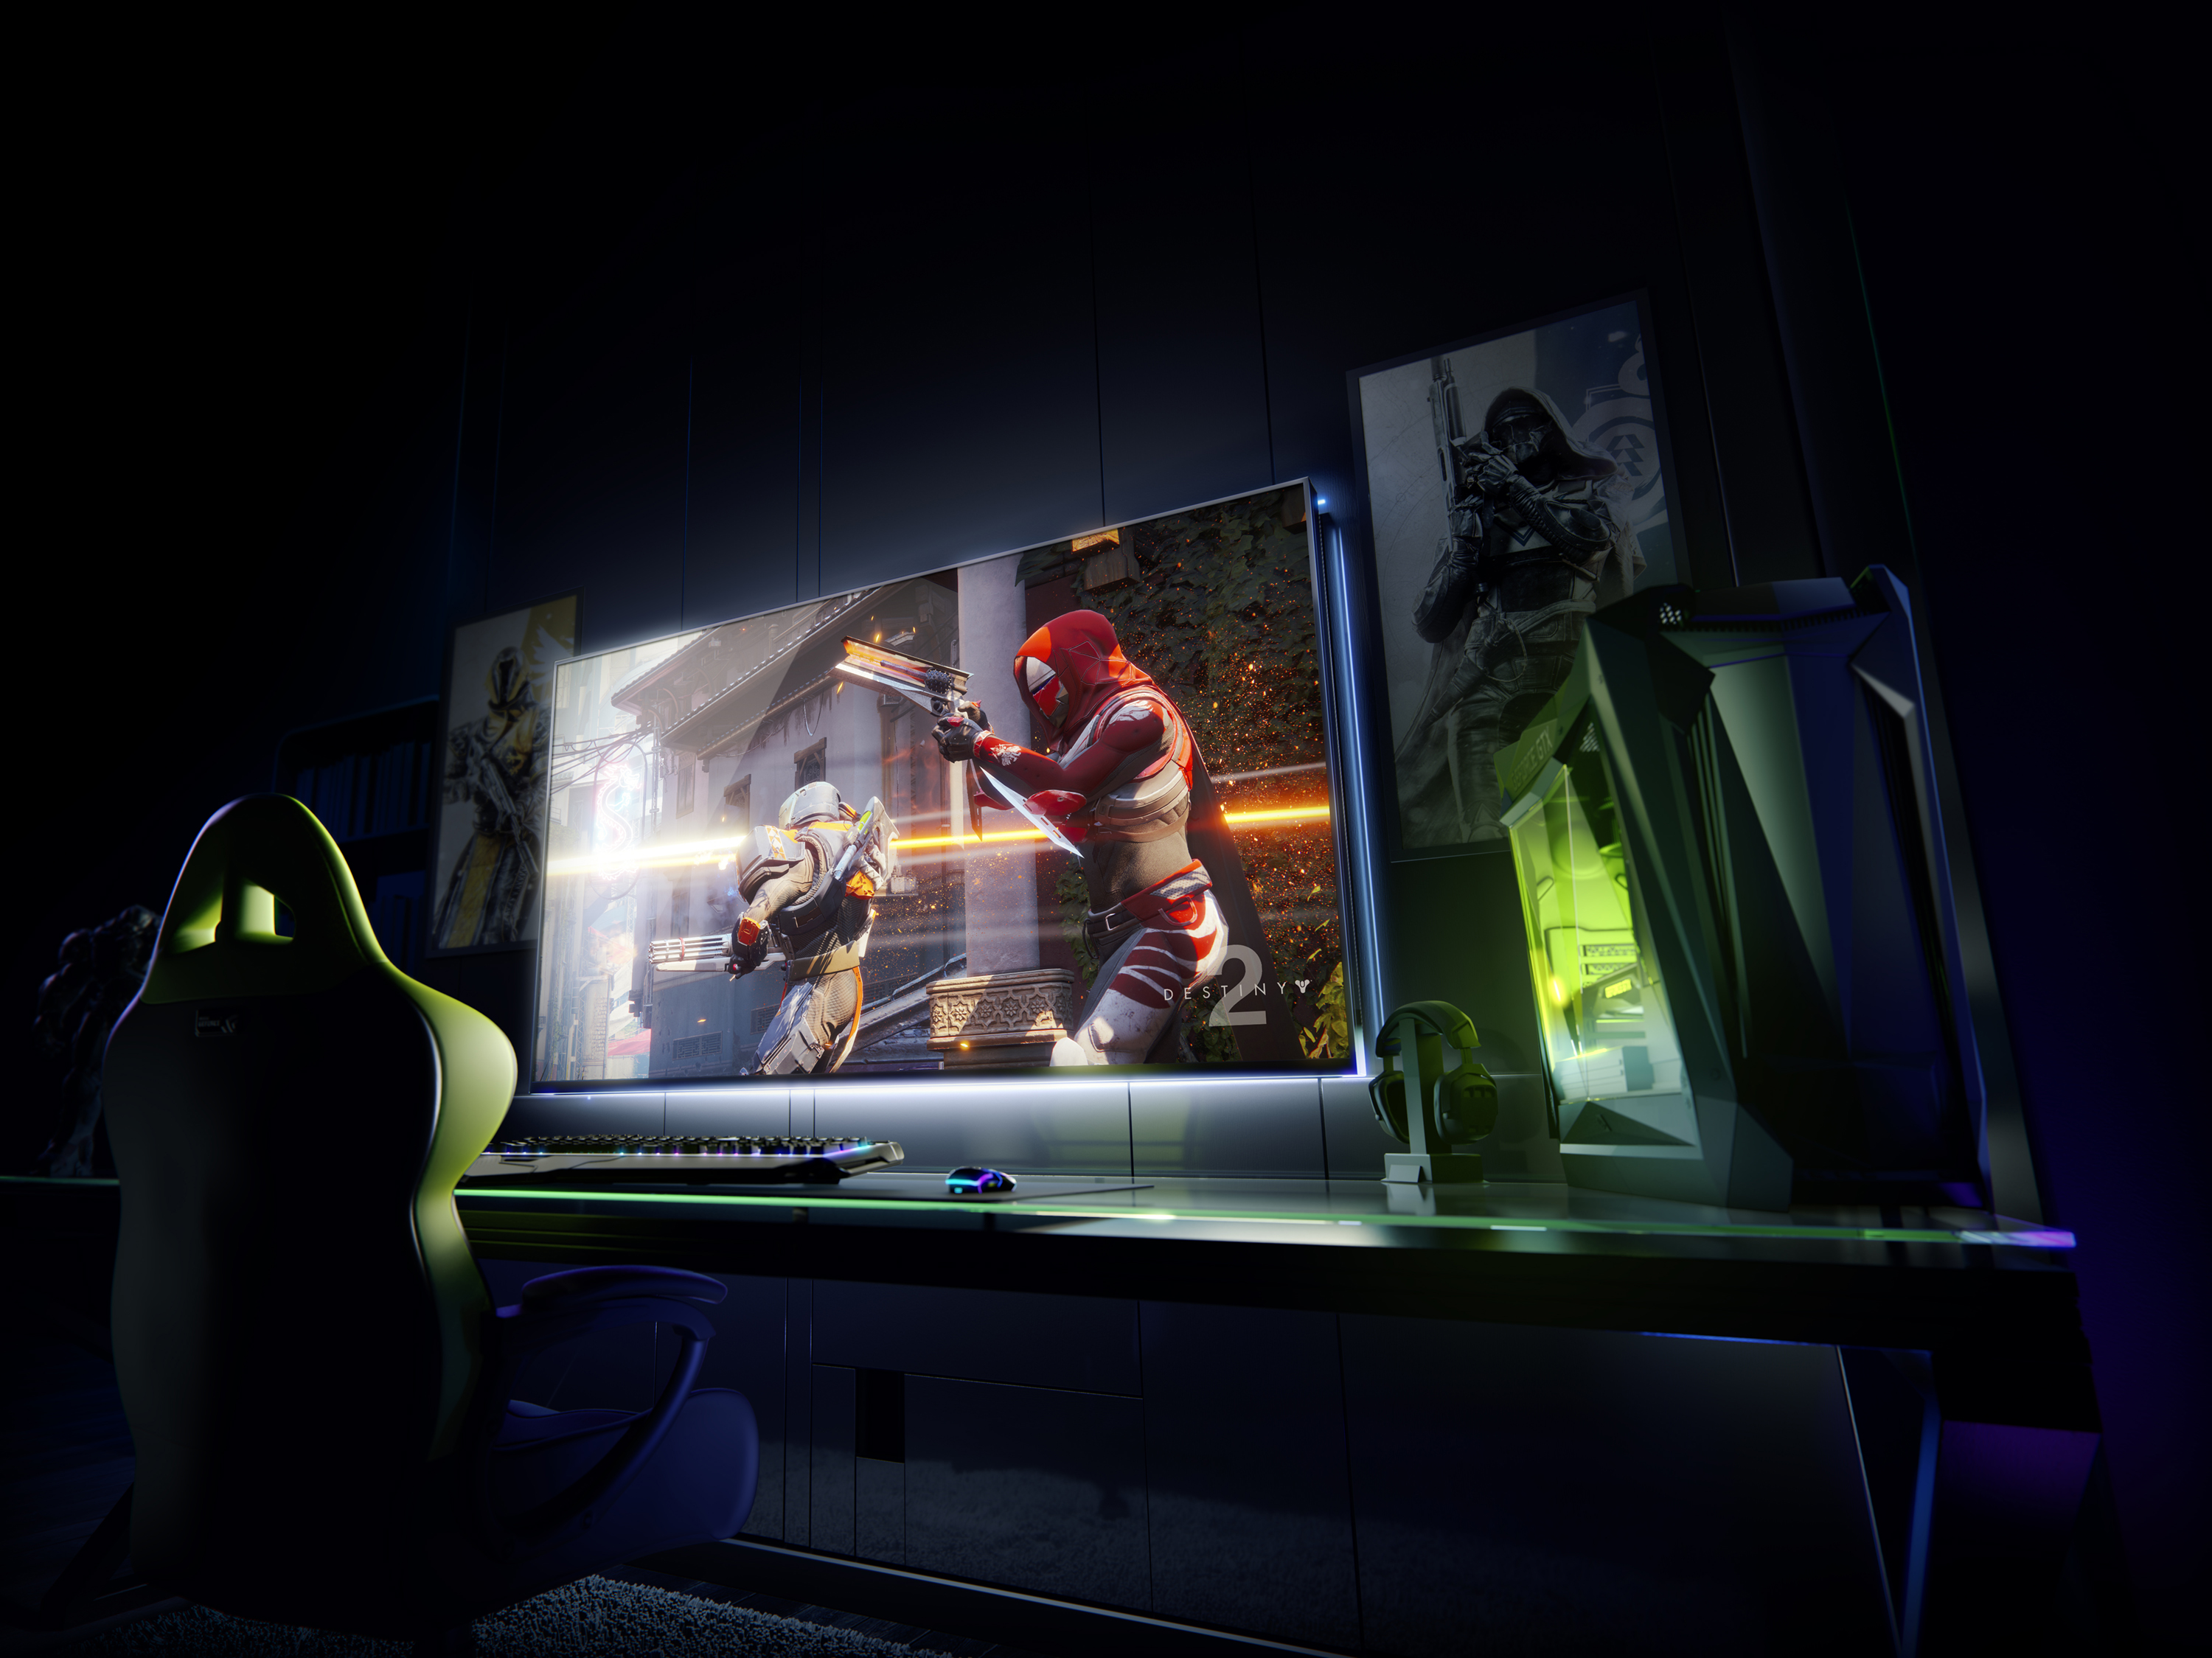 Media asset in full size related to 3dfxzone.it news item entitled as follows: HP svela il monitor Omen X 65 conforme con Big Format Gaming Display di NVIDIA | Image Name: news27666_HP-Omen-X-65_5.png